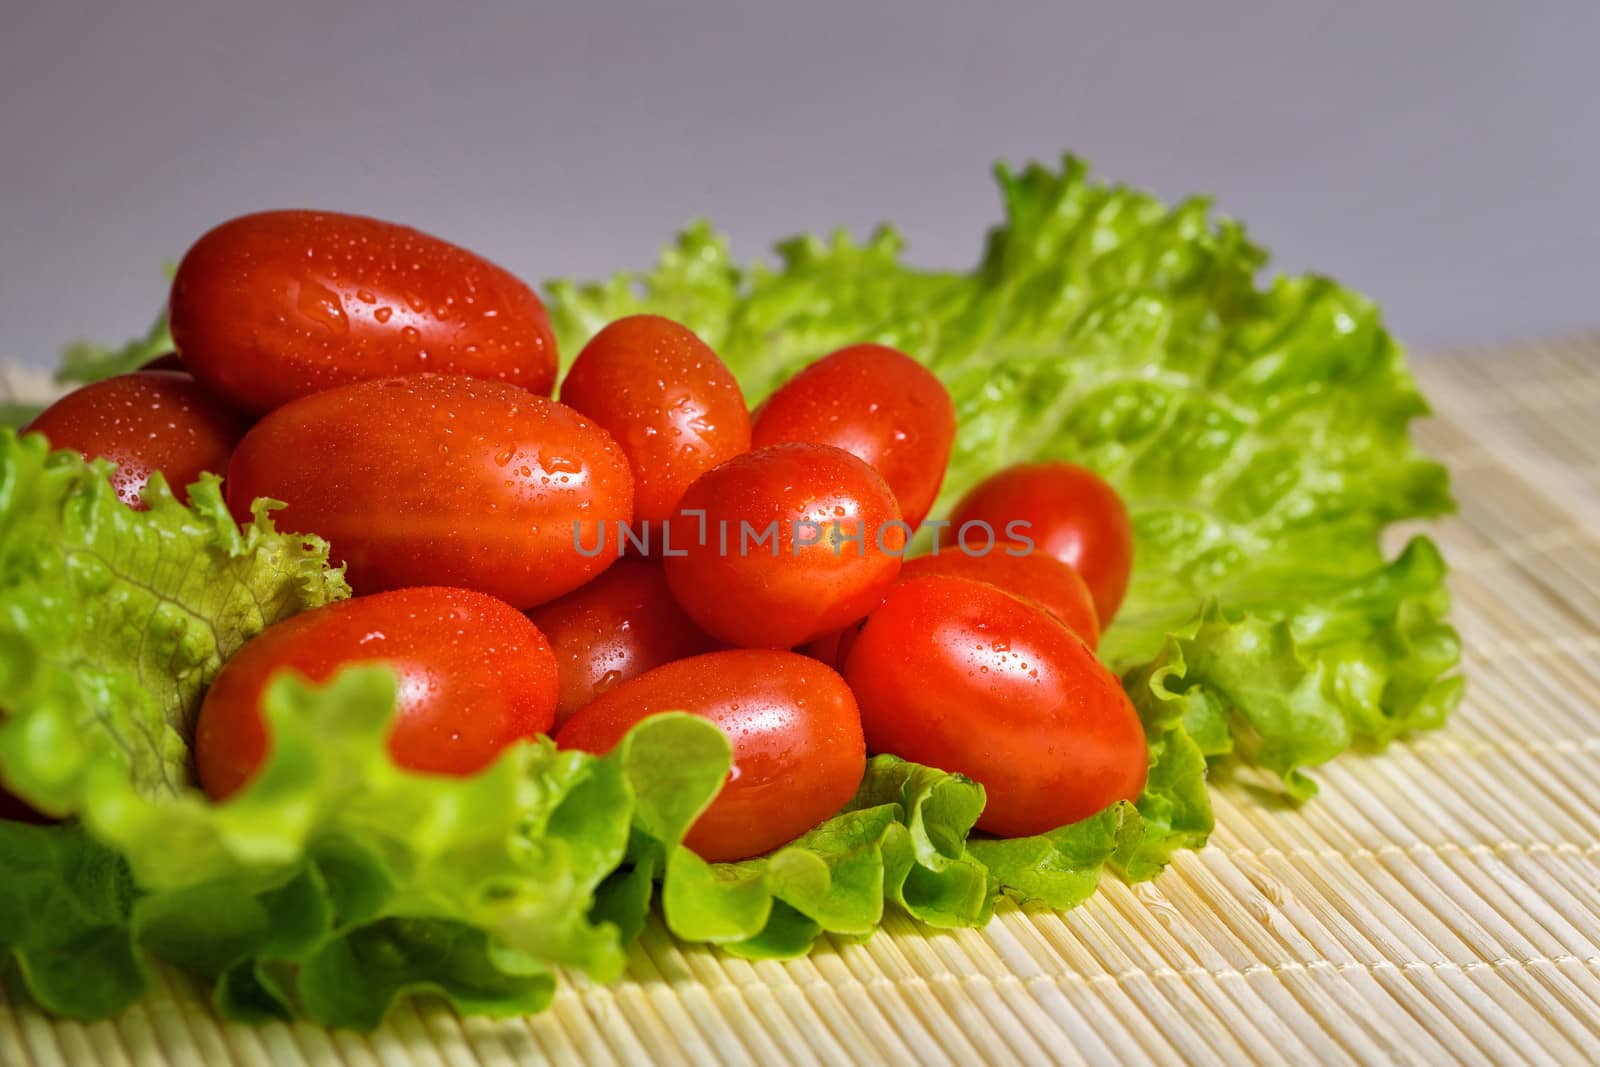 Vegetarian tomato and lettuce on bamboo tray are photographed close-up